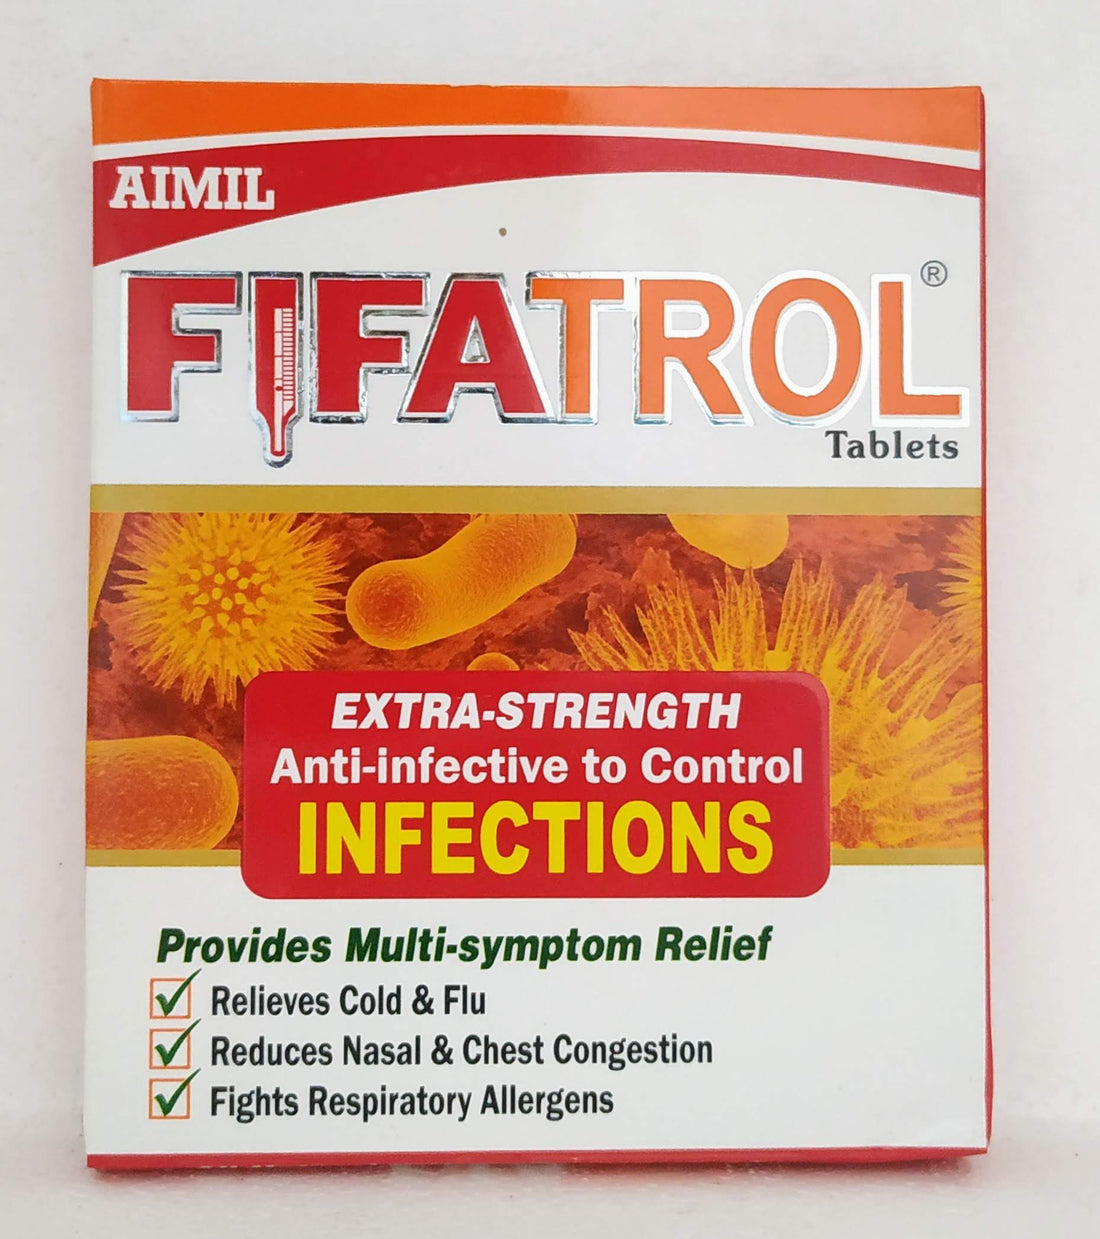 Shop Fifatrol tablets - 30Tablets at price 203.00 from Aimil Online - Ayush Care